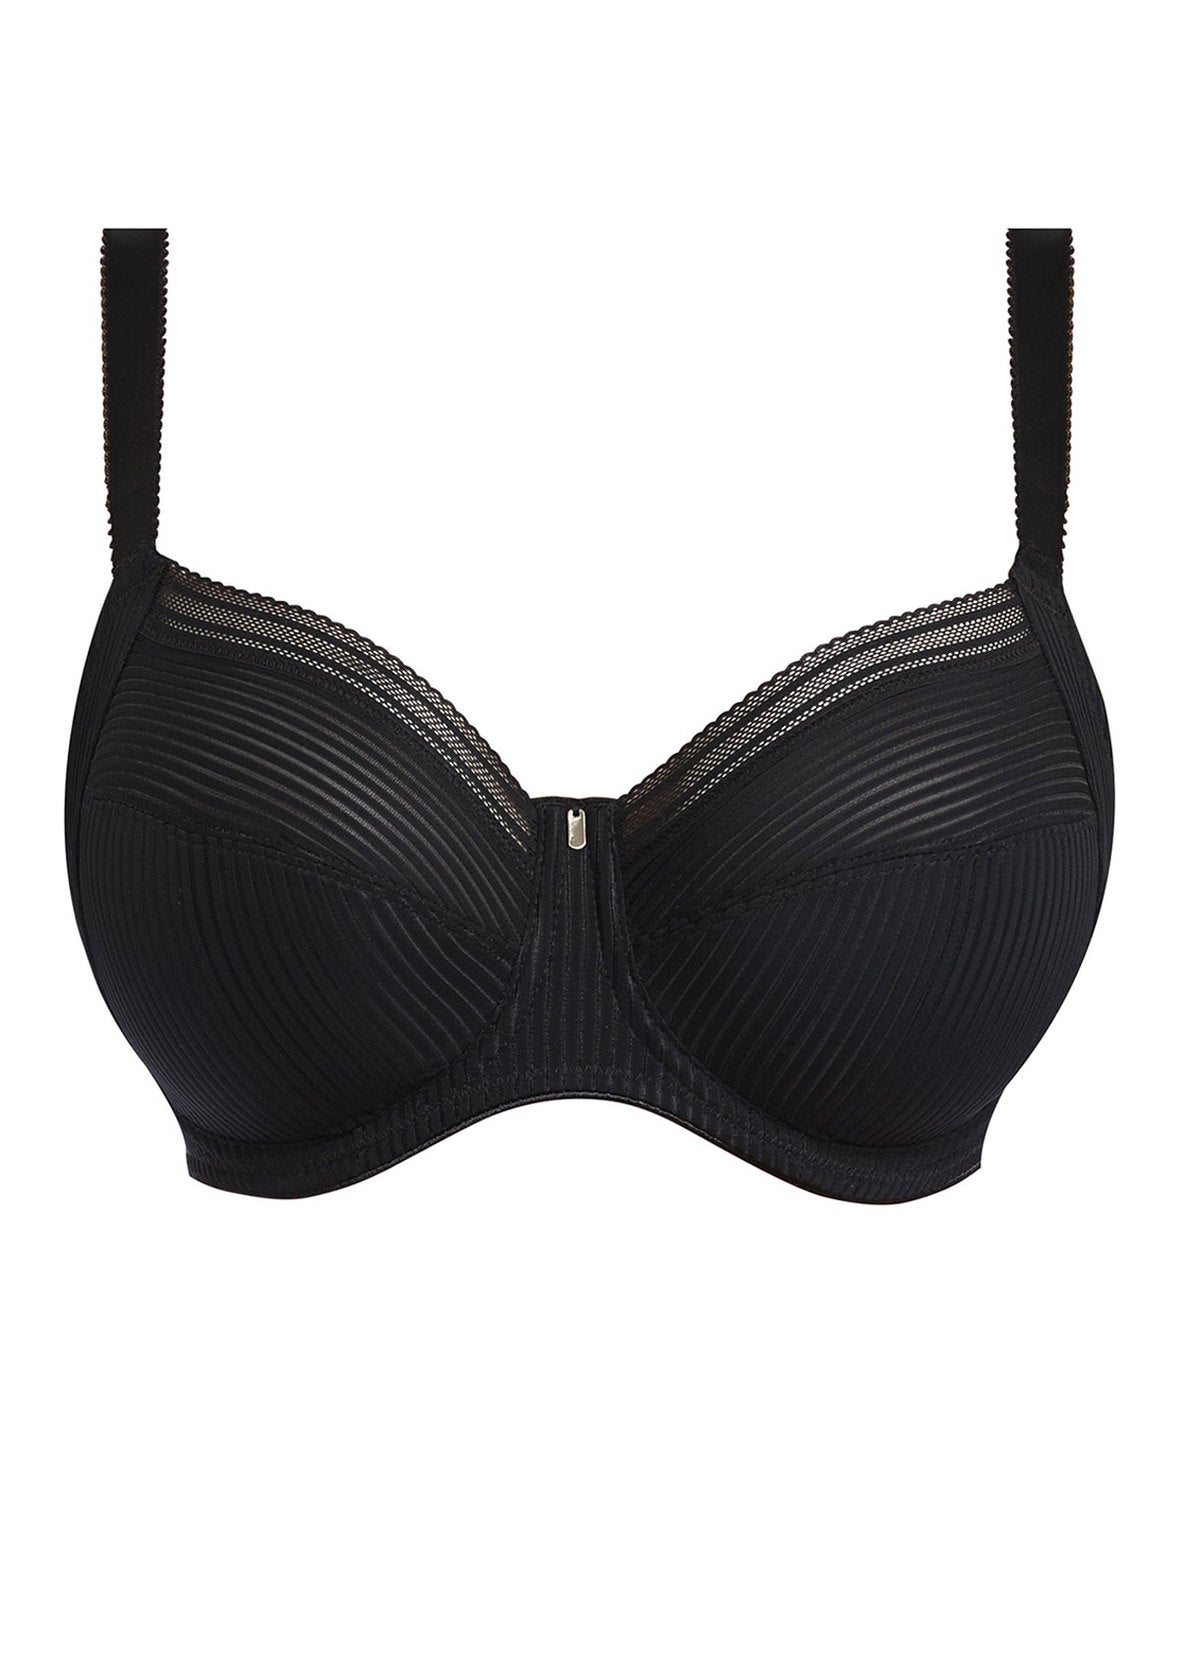 Fusion Full Cup Side Support Bra FL3091 - Black